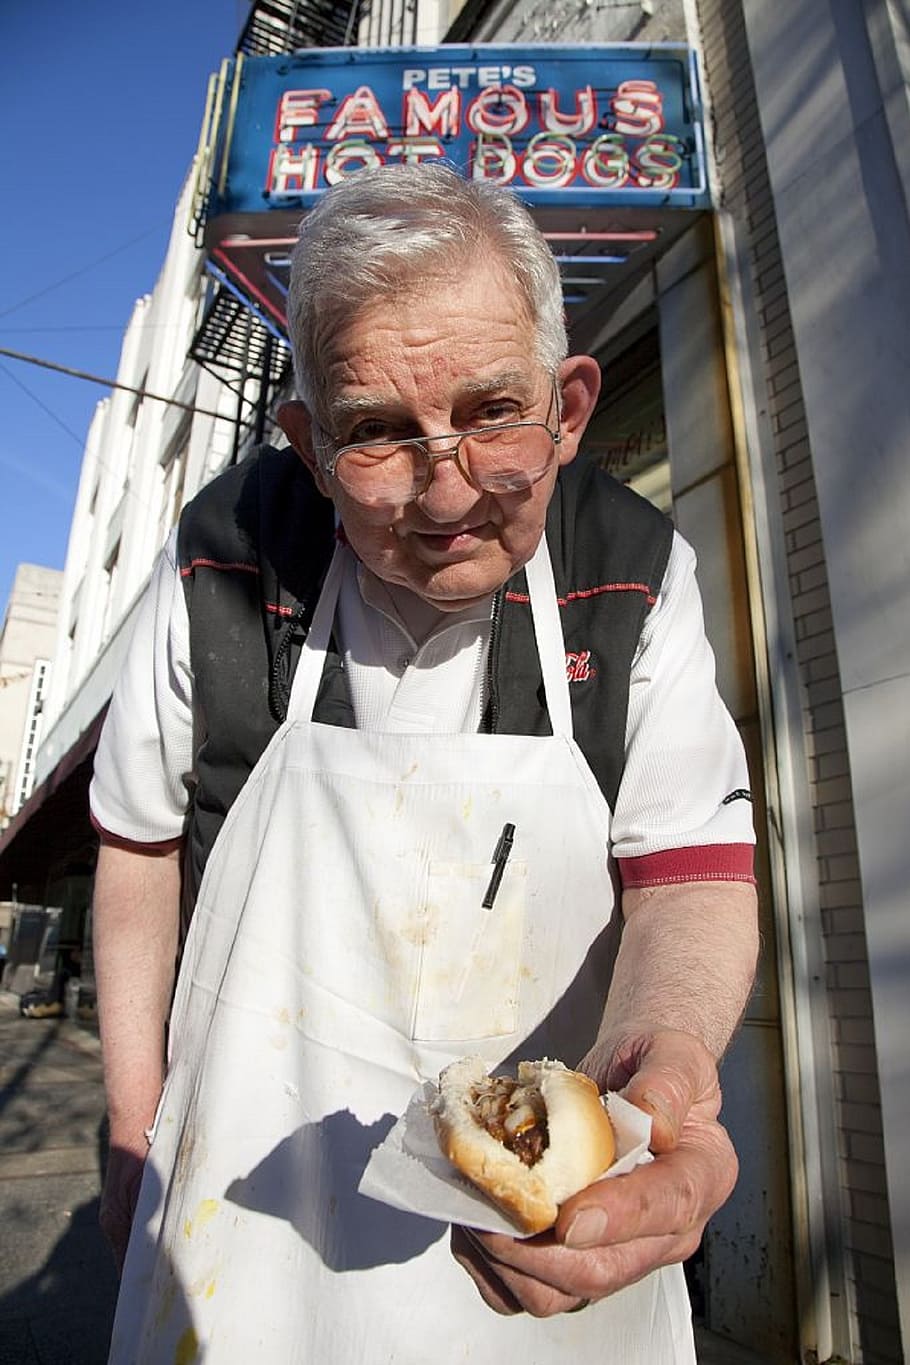 man holding burger, hot dog vendor, man, food, person, american, eating, fast, traditional, male